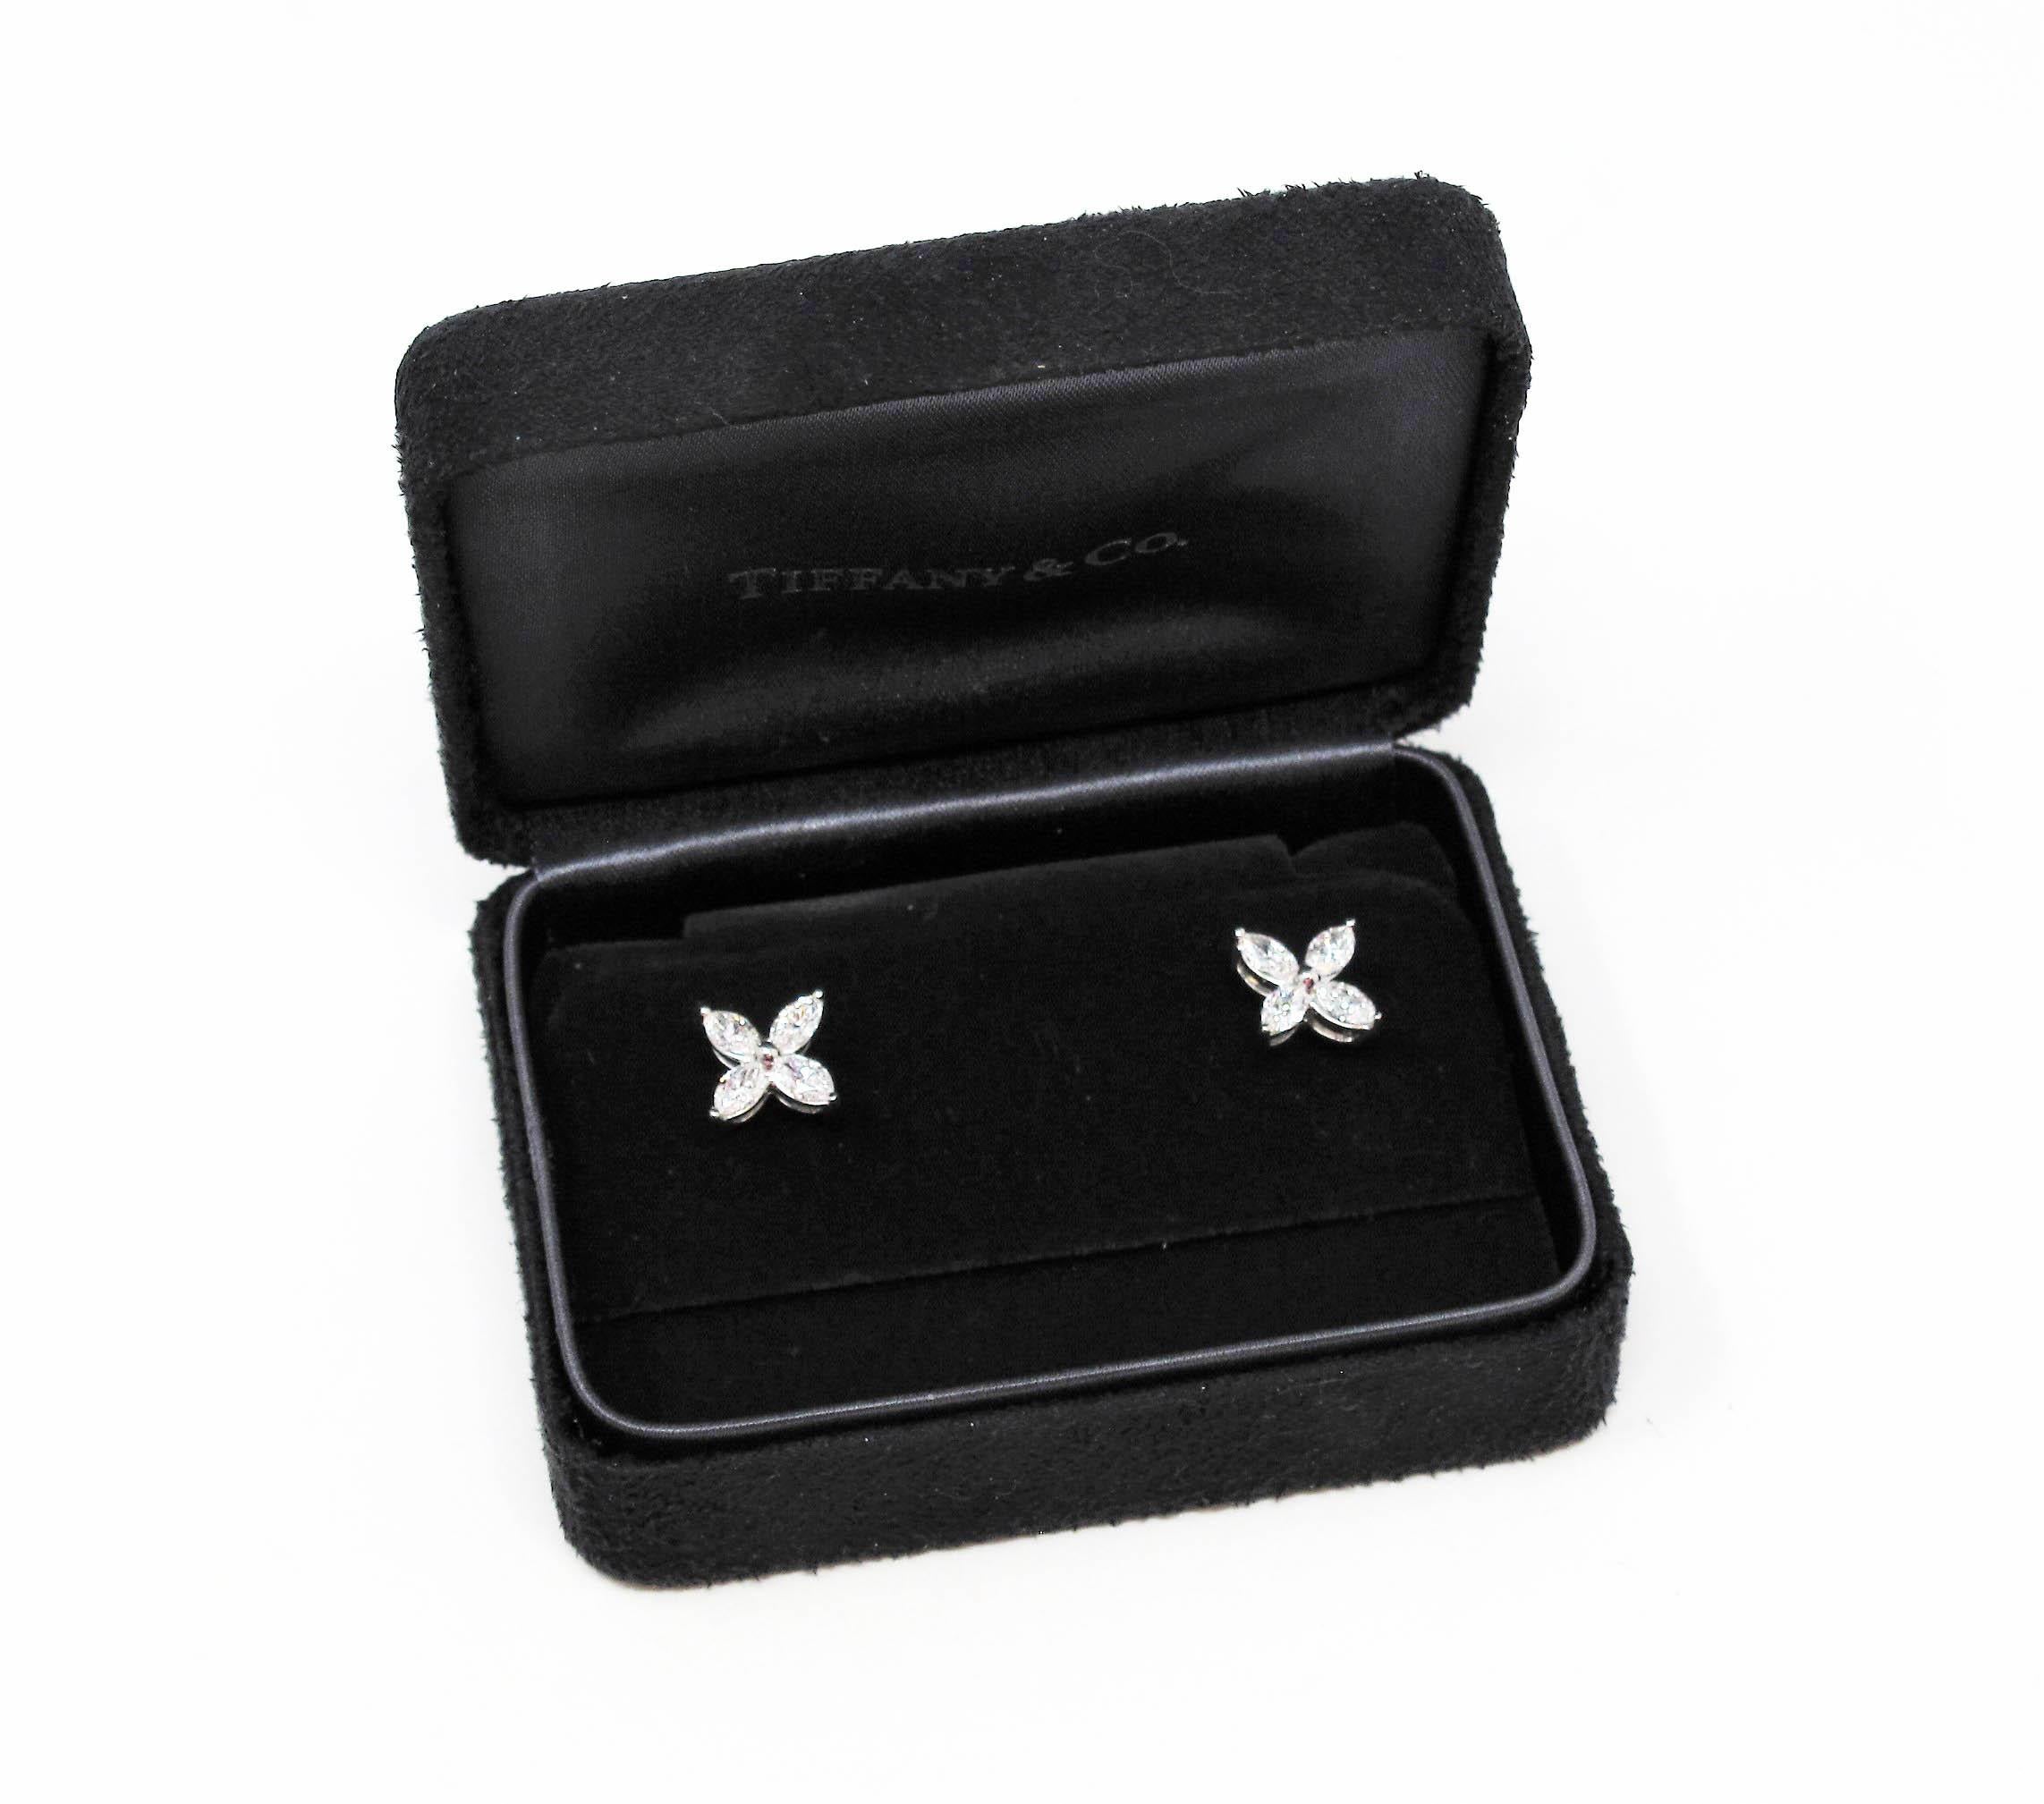 These brilliant marquise diamond and platinum earrings are absolutely bursting with sparkle! Part of the Tiffany & Co. Victoria Collection, these incredible stud earrings are the epitome of modern elegance. The gorgeous 4 pronged design fills the